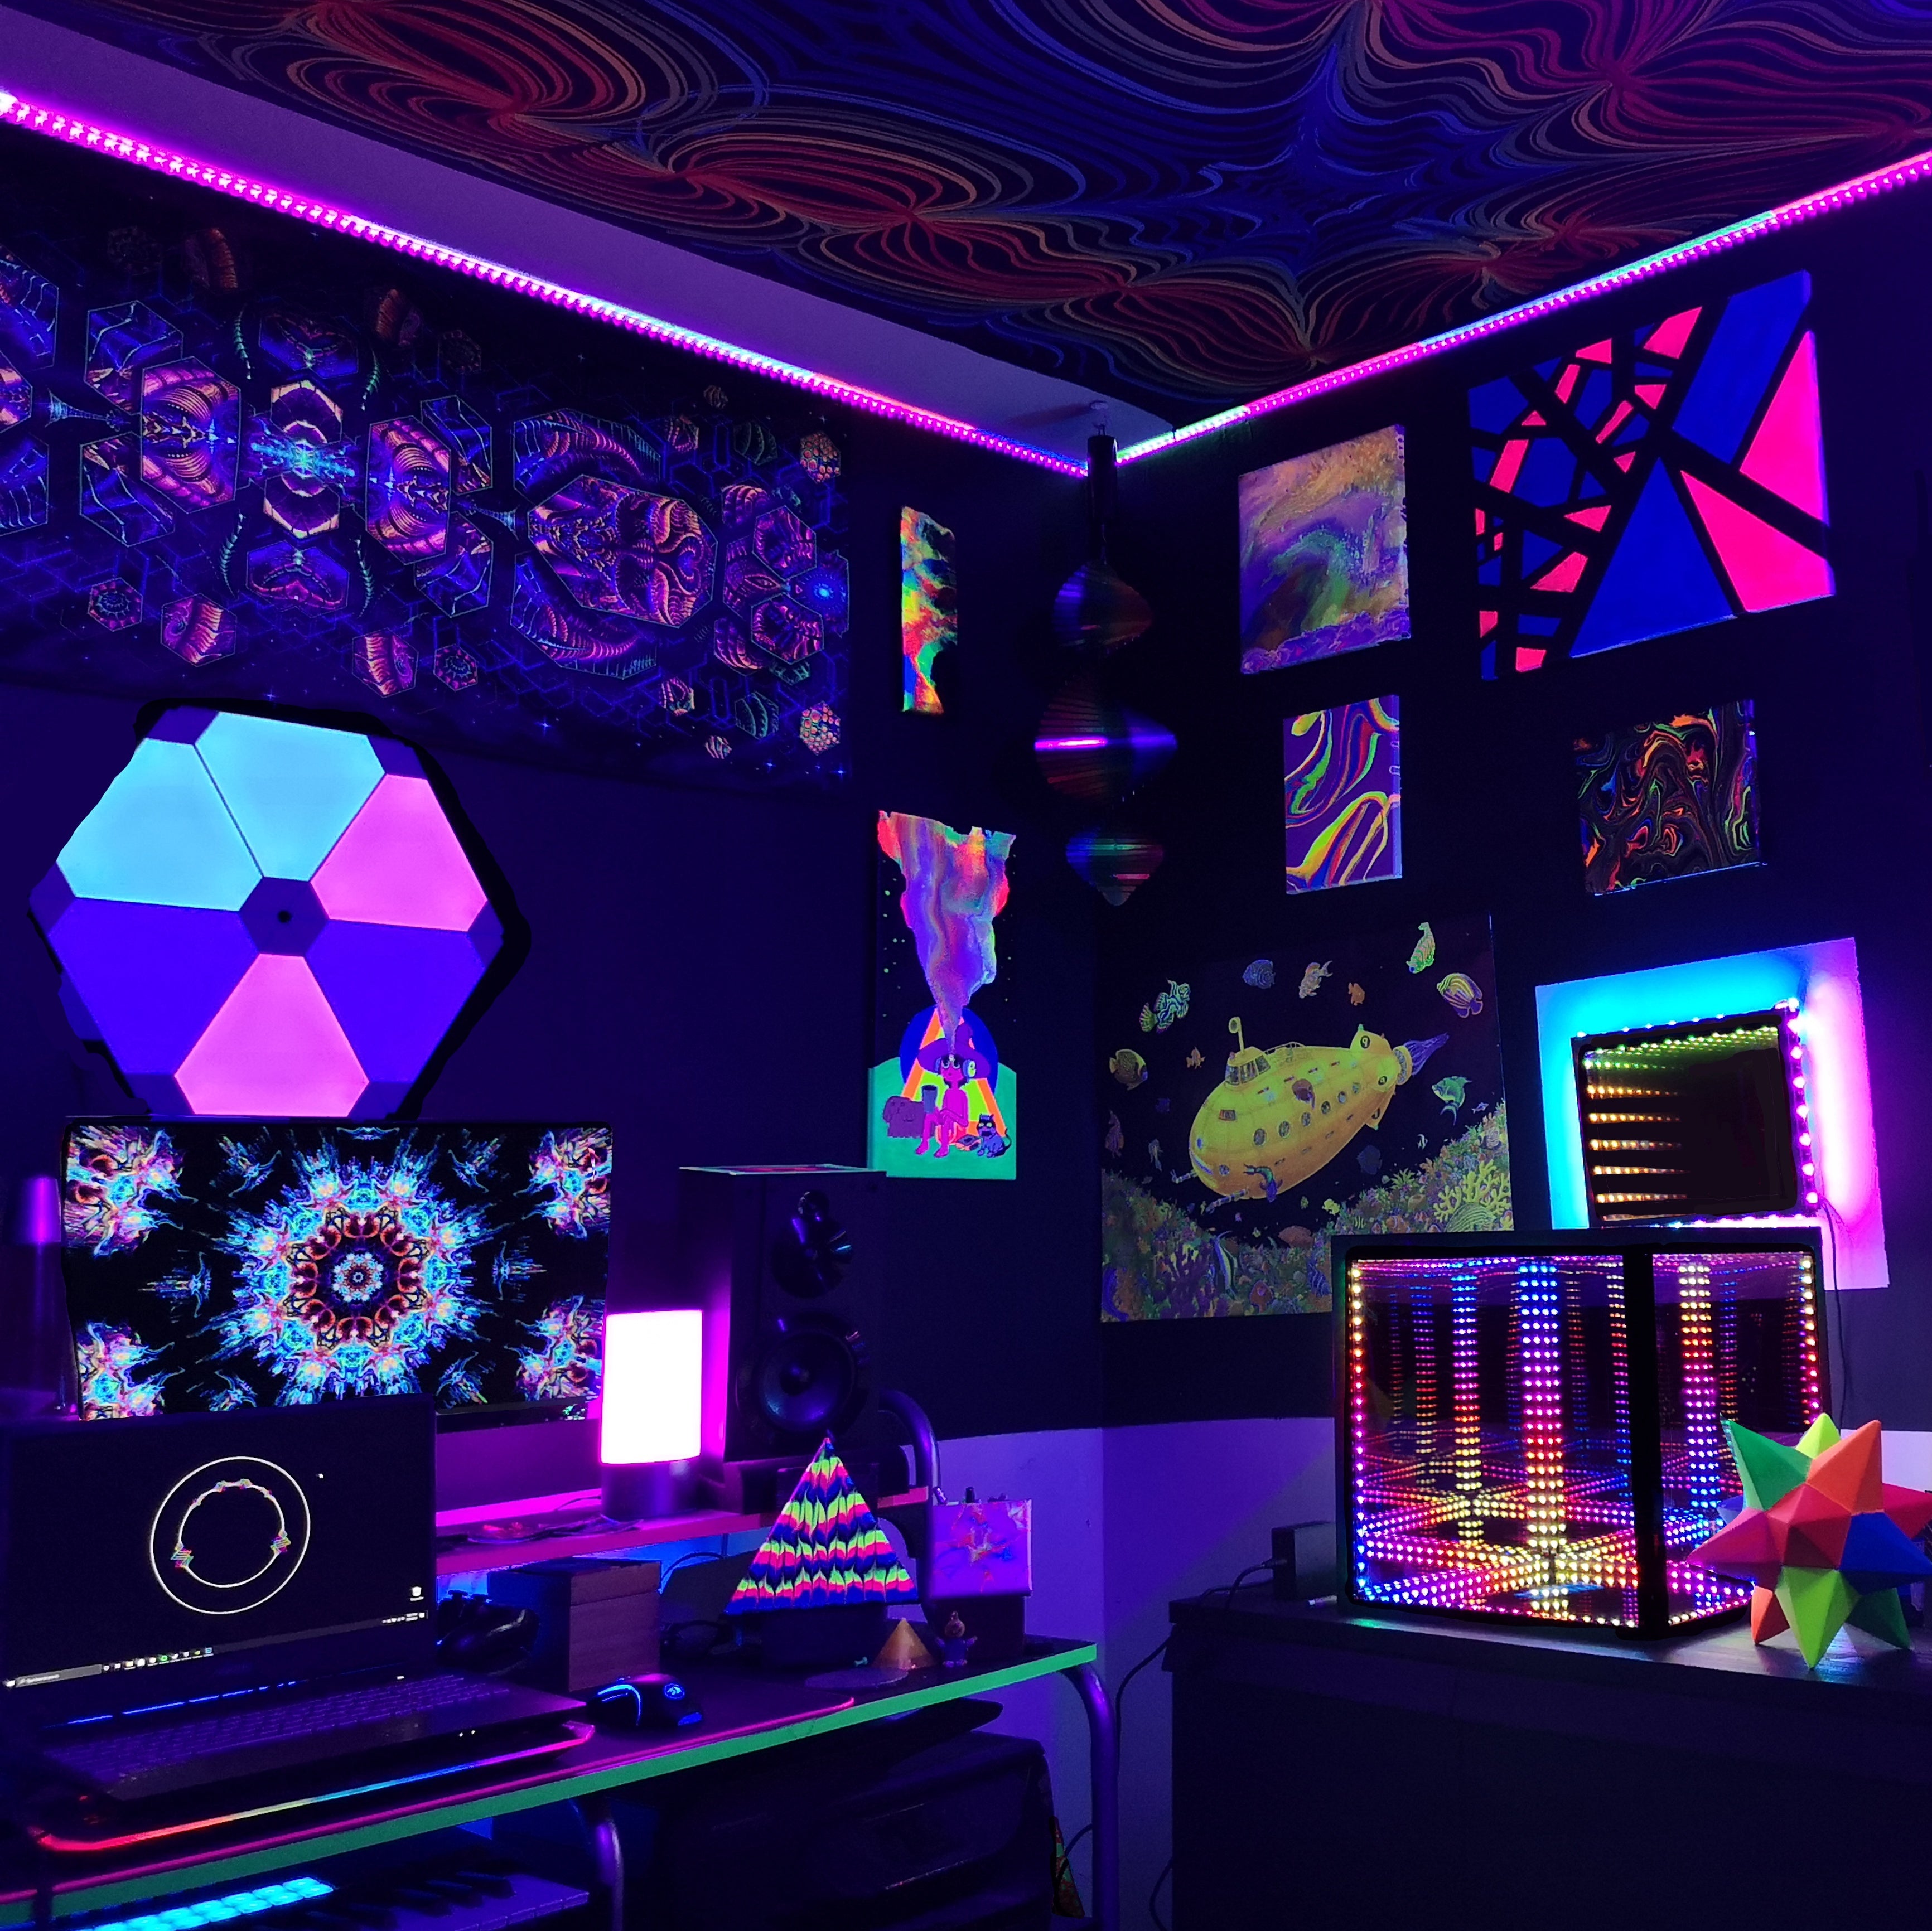 Corner of a man cave with trippy lighting decorations on the walls as well as a HyperCube